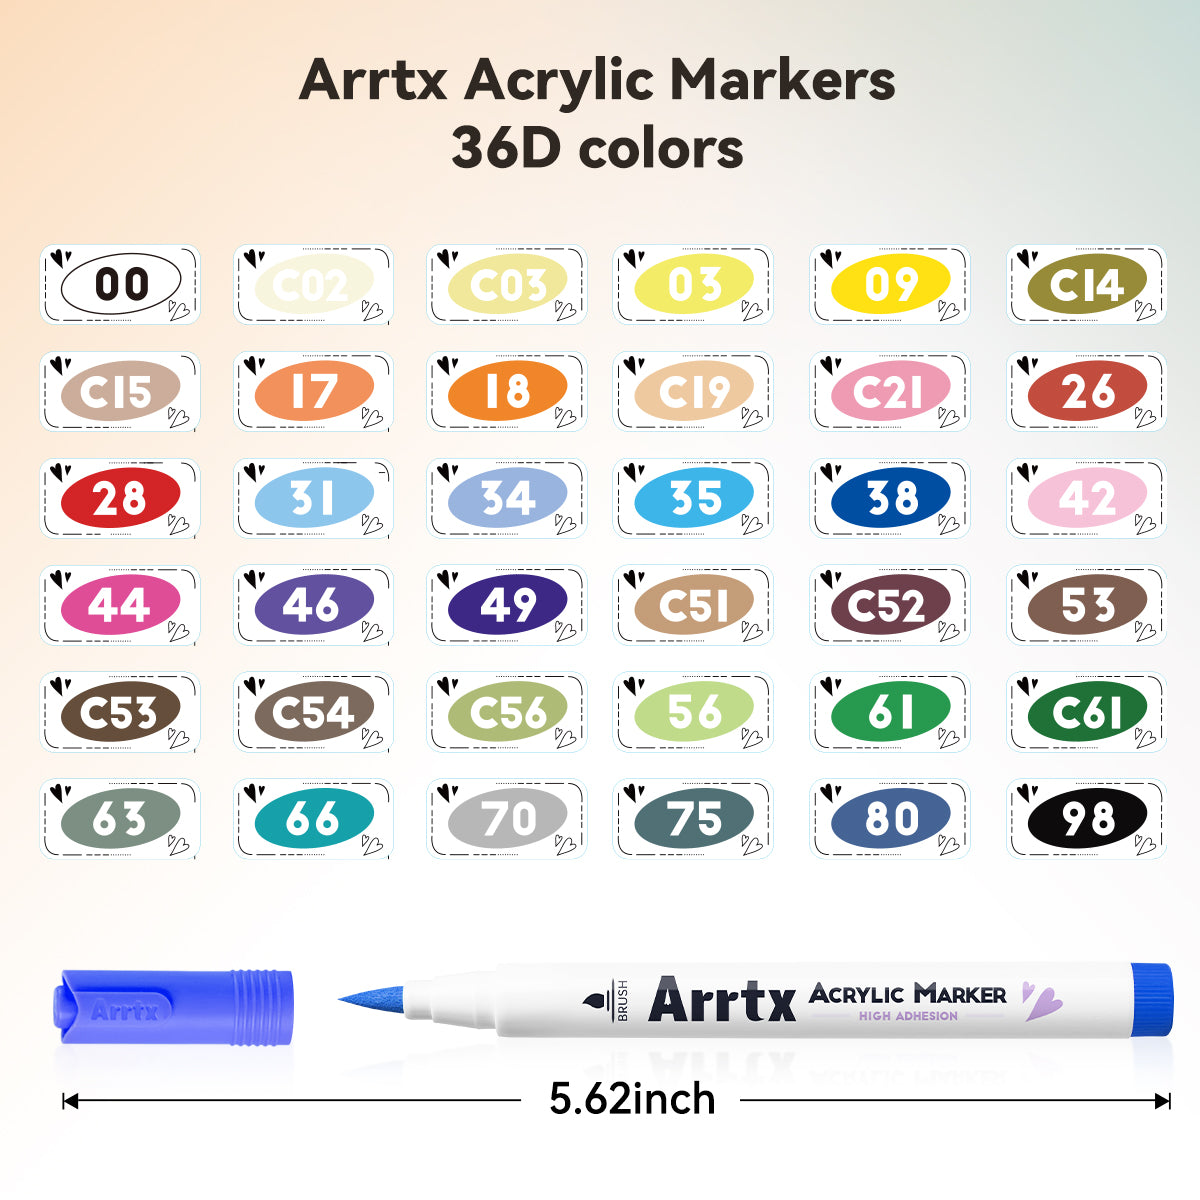 18/28 colors 0.7mm Round Tip Acrylic Pens Marker Pens Waterproof